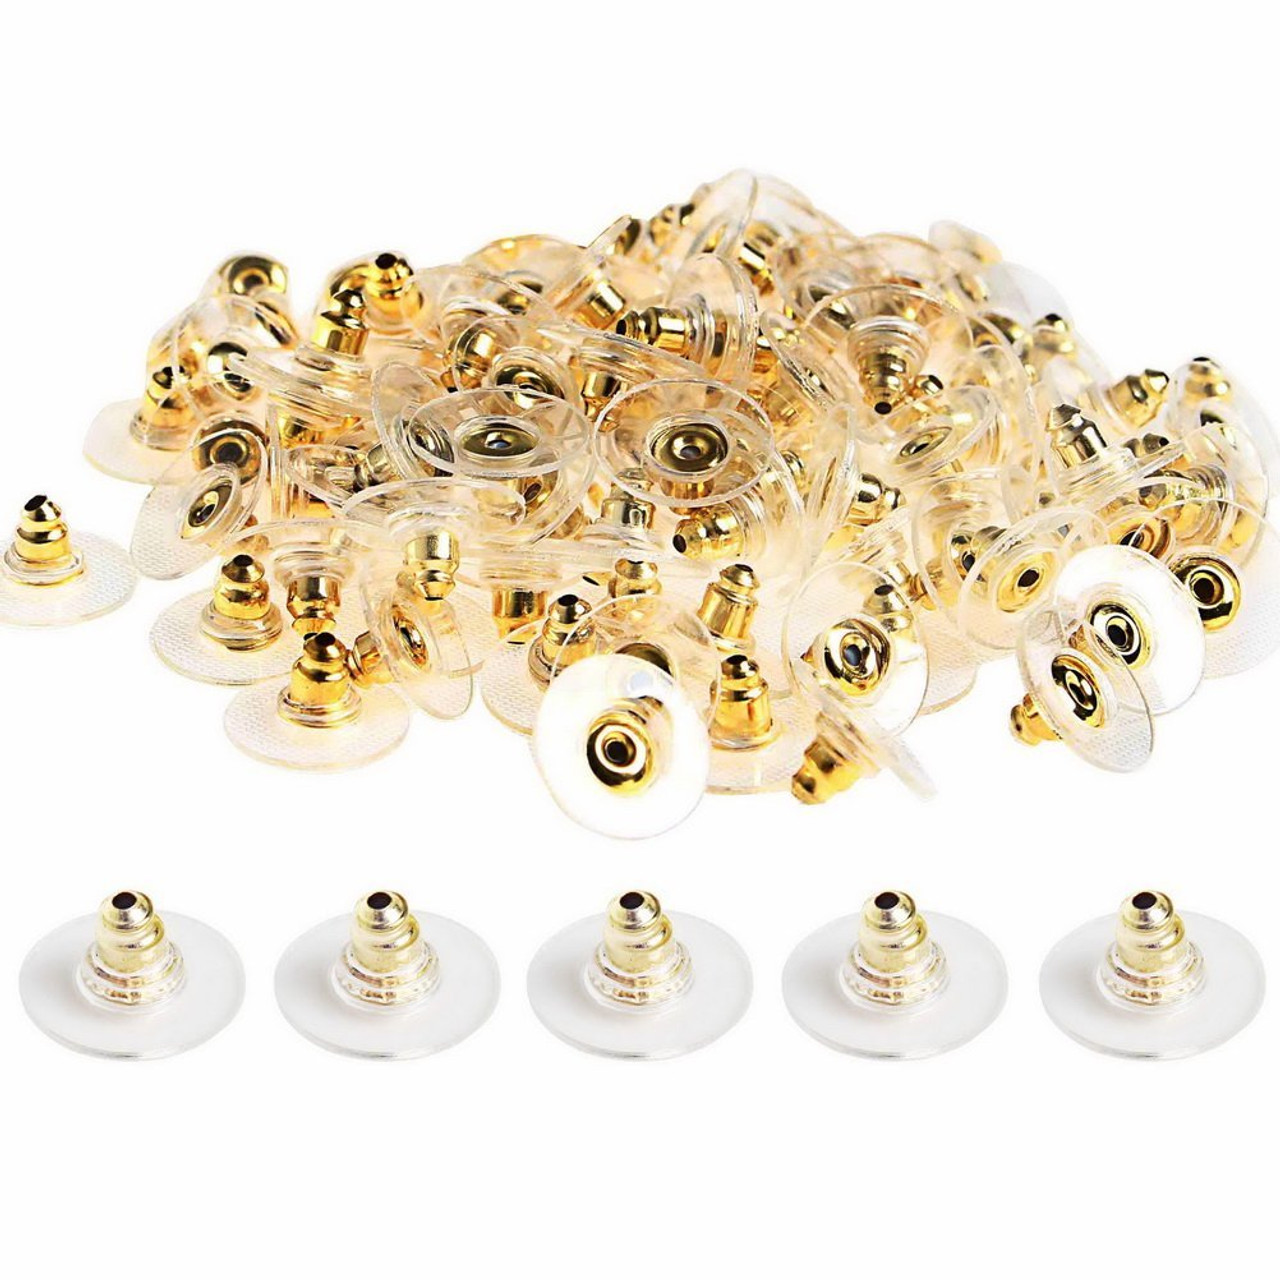 500 Pieces Bullet Earring Backs with Pad Hypoallergenic.-GOLD